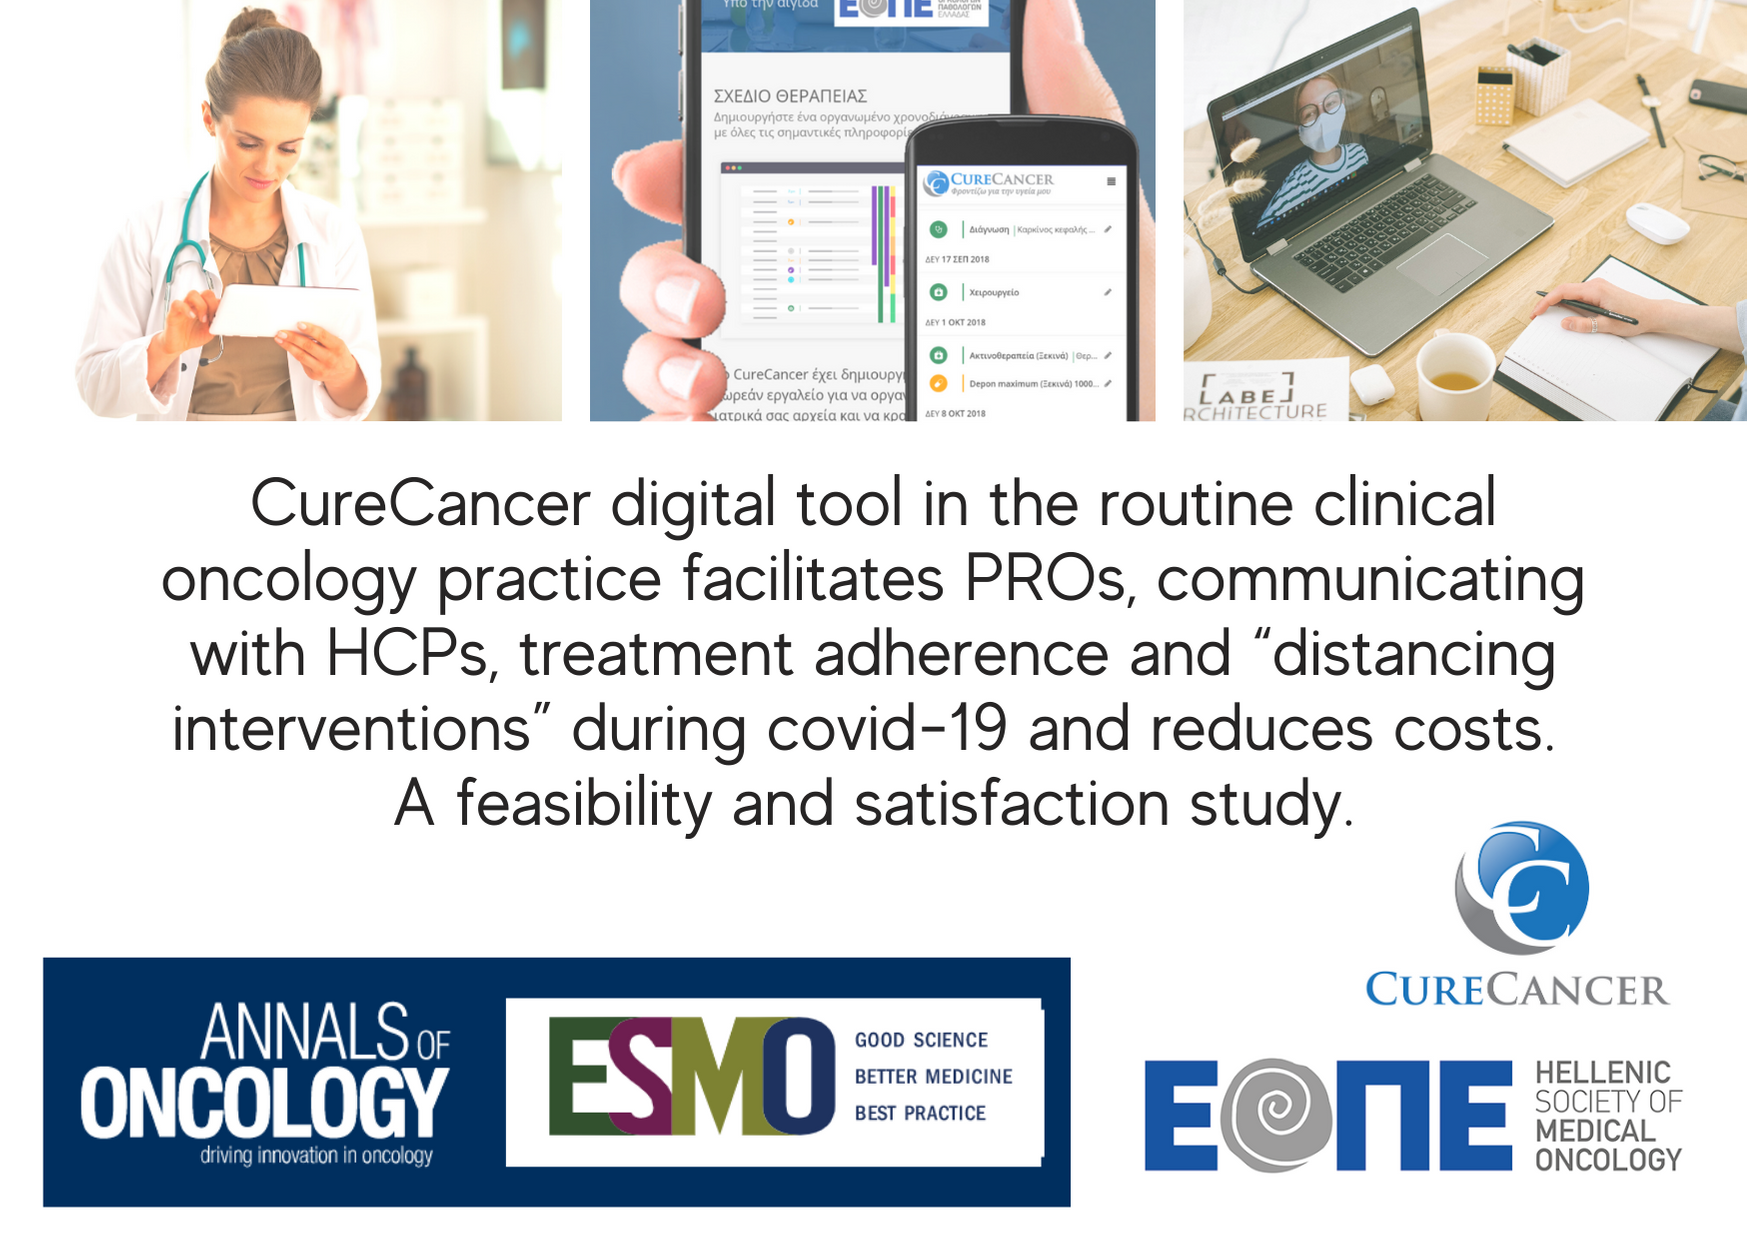 Annals of Oncology: Publication of CureCancer - mycancer.gr study abstract